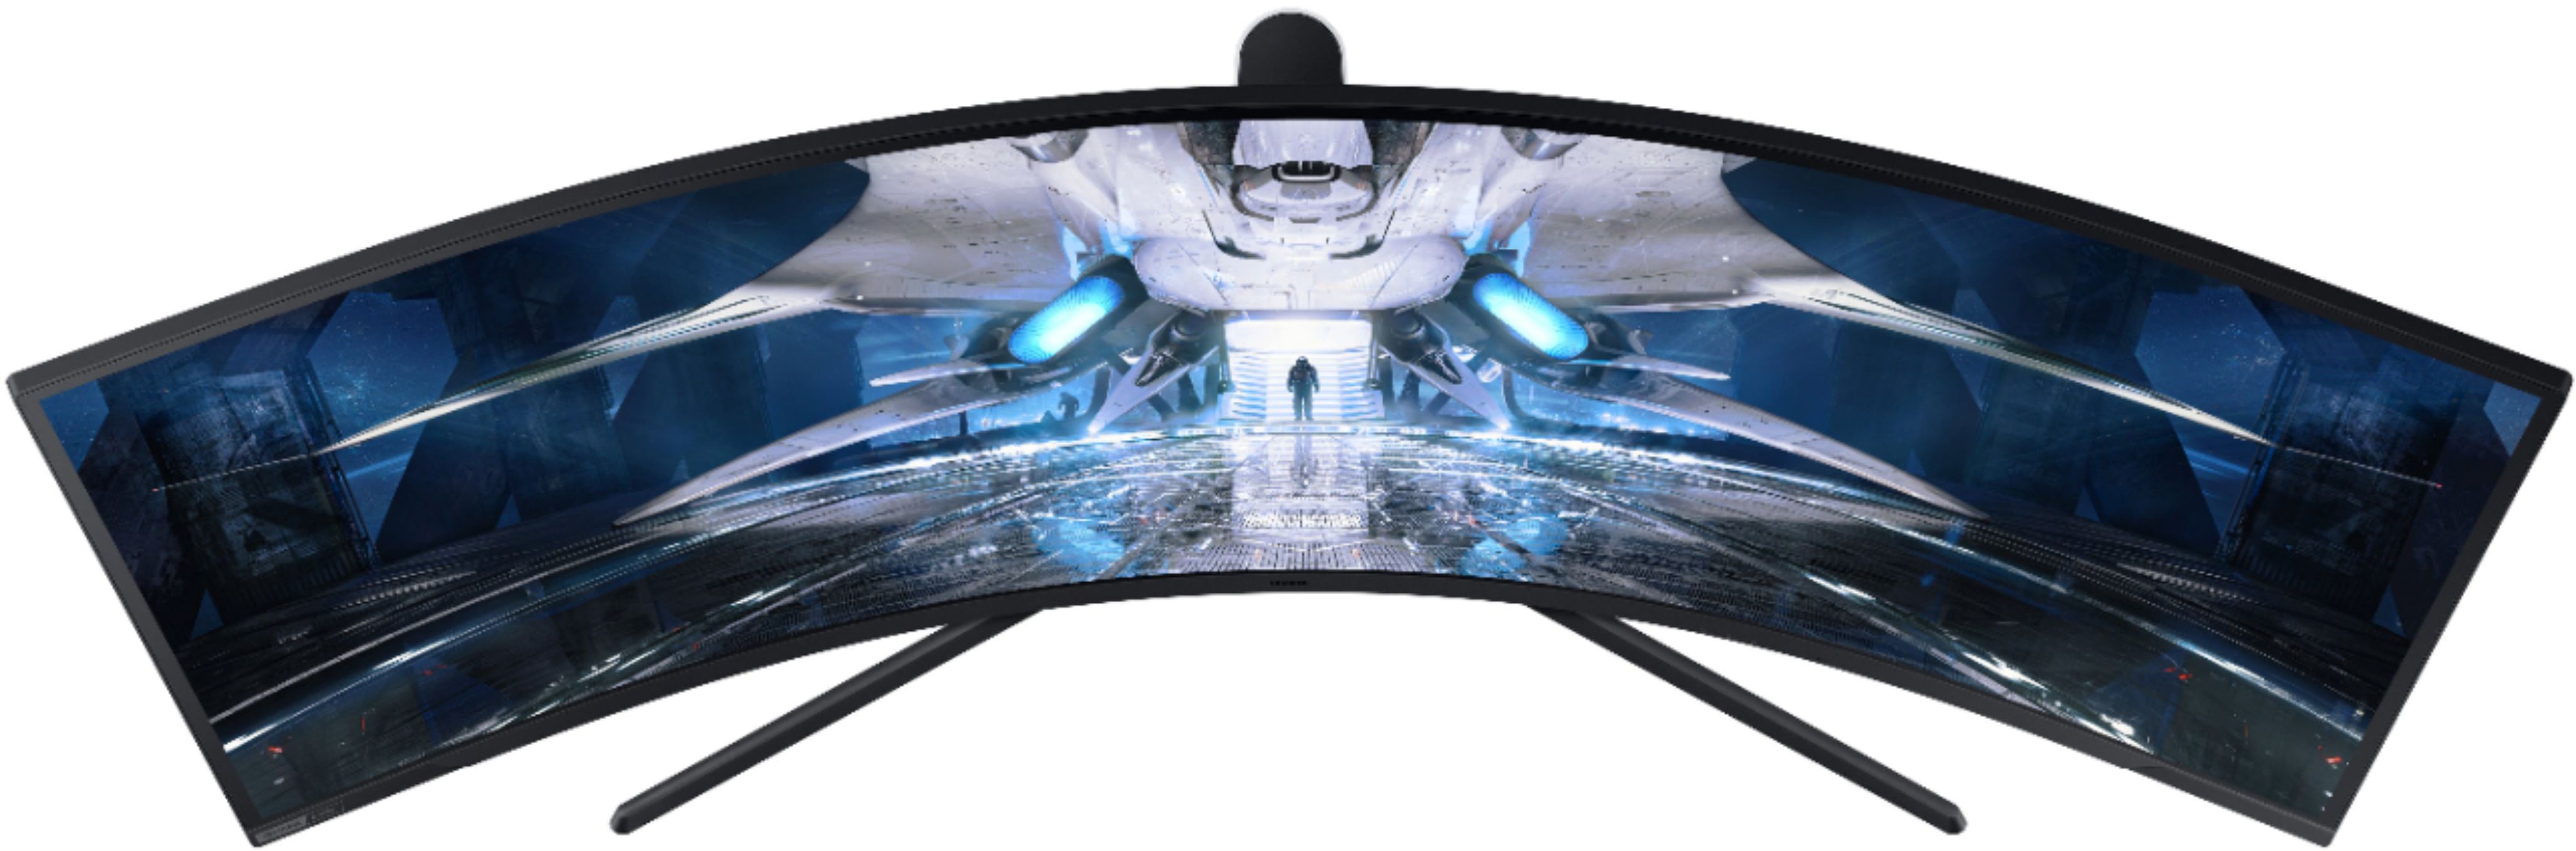 49” Samsung's largest 1000R gaming monitor - LC49G95TSSNXZA